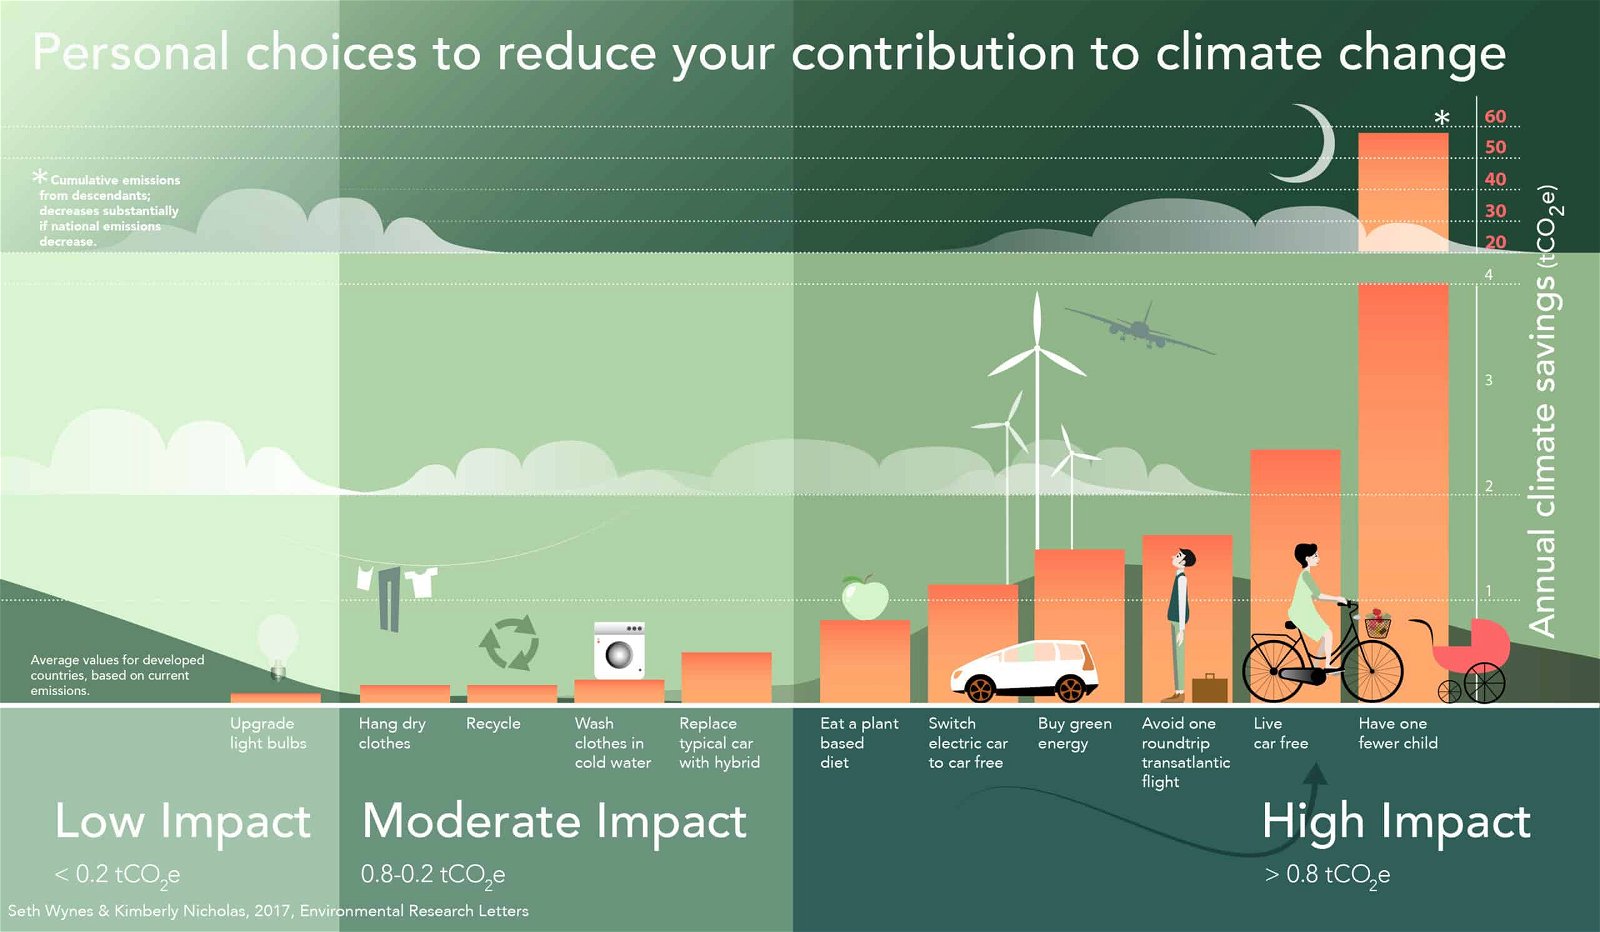 high impact actions reduce emissions